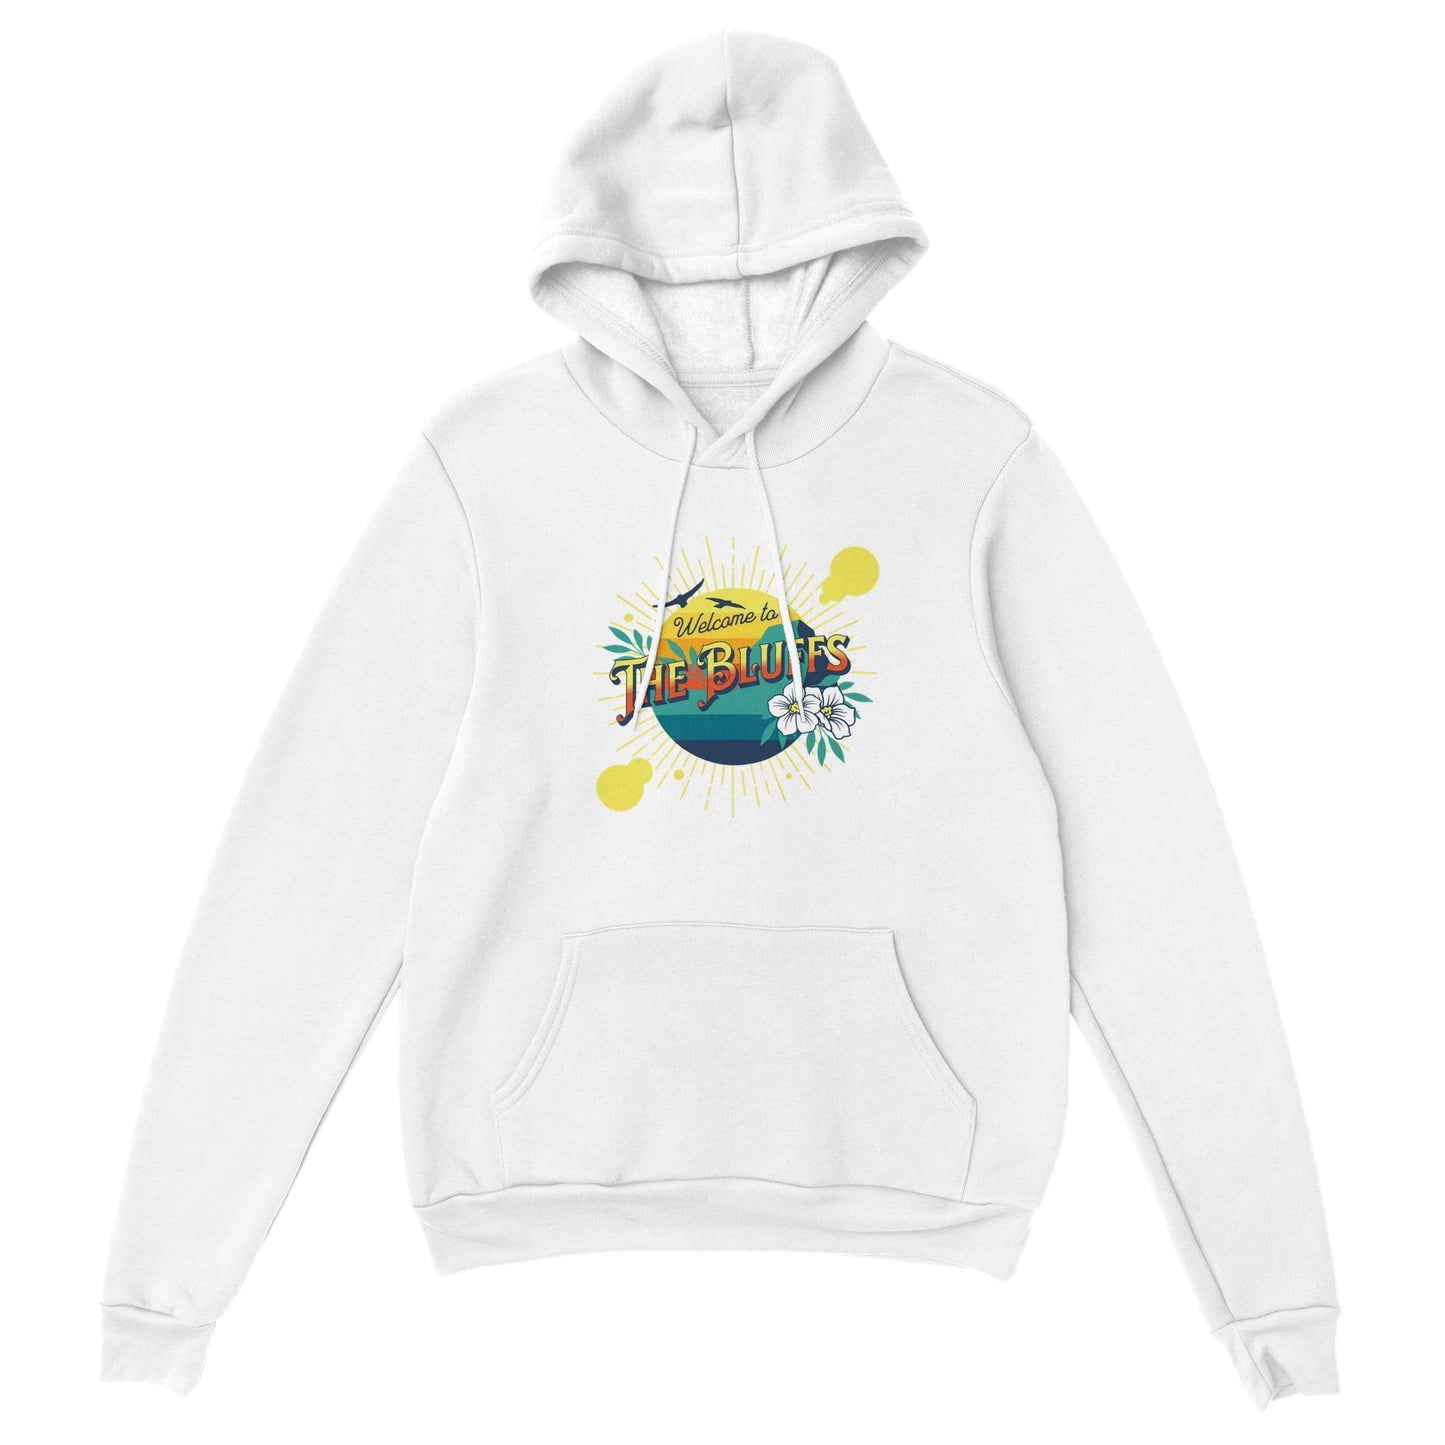 "Welcome to The Bluffs" Premium Unisex Pullover Hoodie